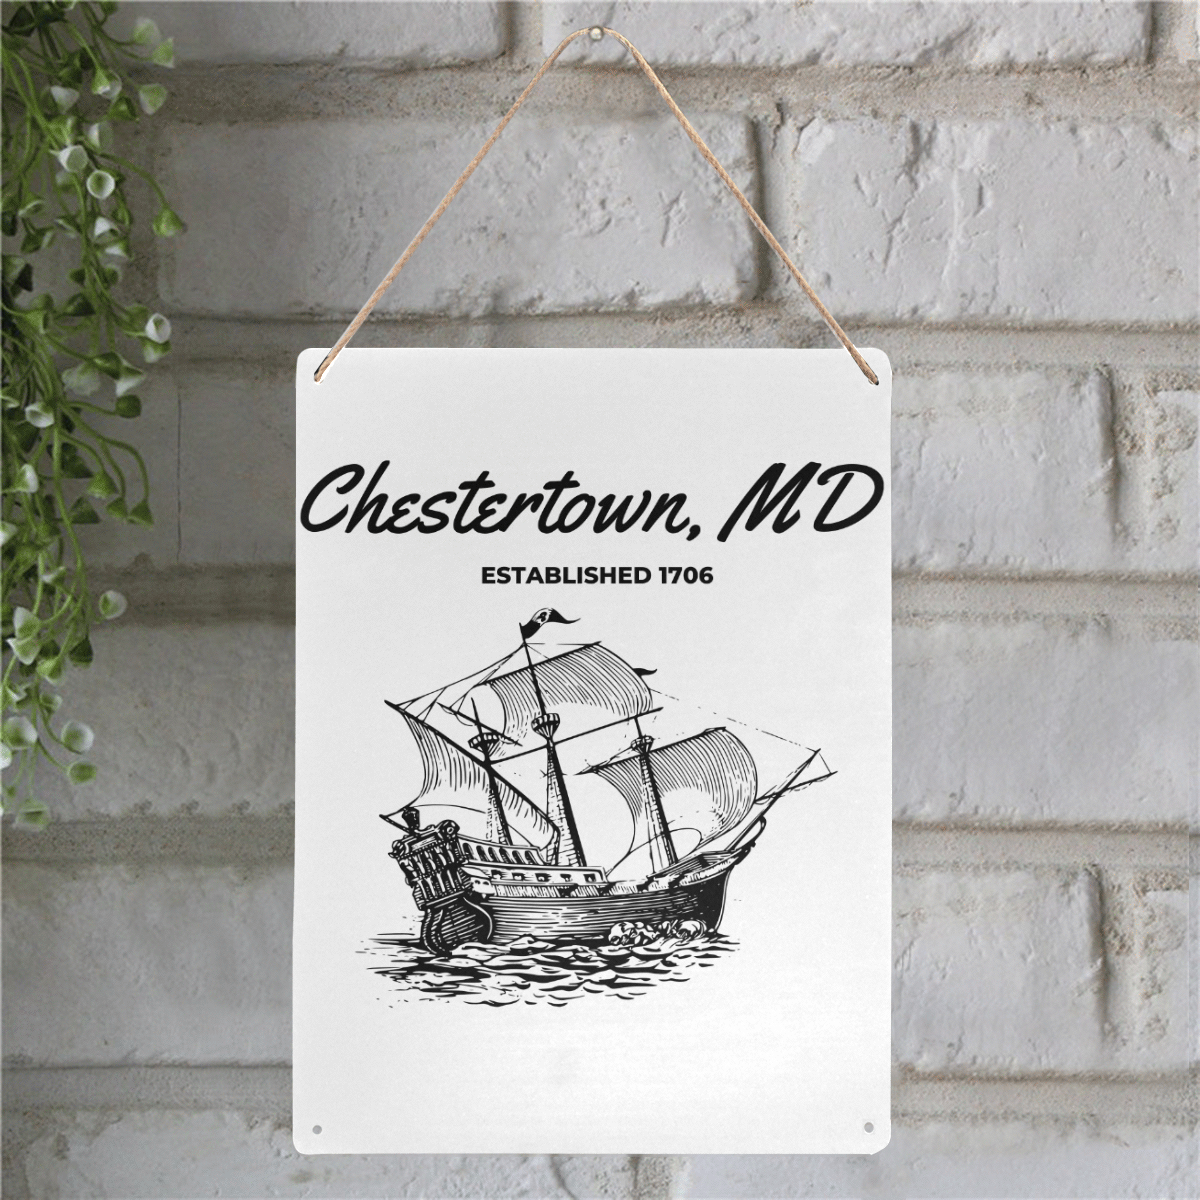 Chestertown, MD Metal Tin Sign 12"x16"